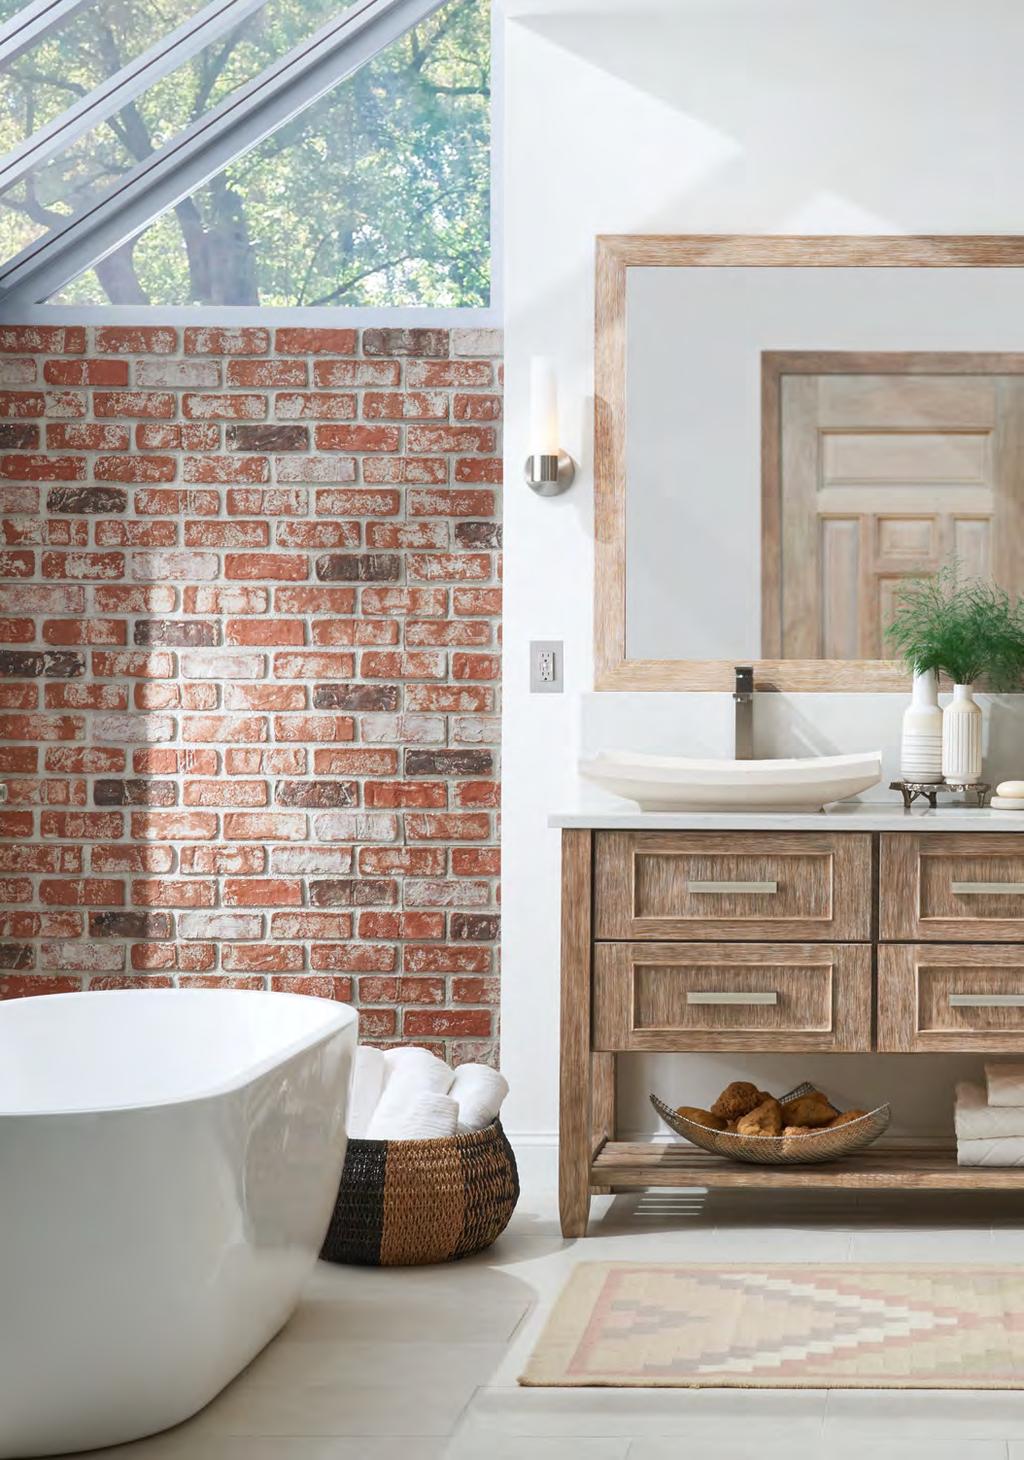 12 Exposed brick and natural stone sinks evoke a feeling of